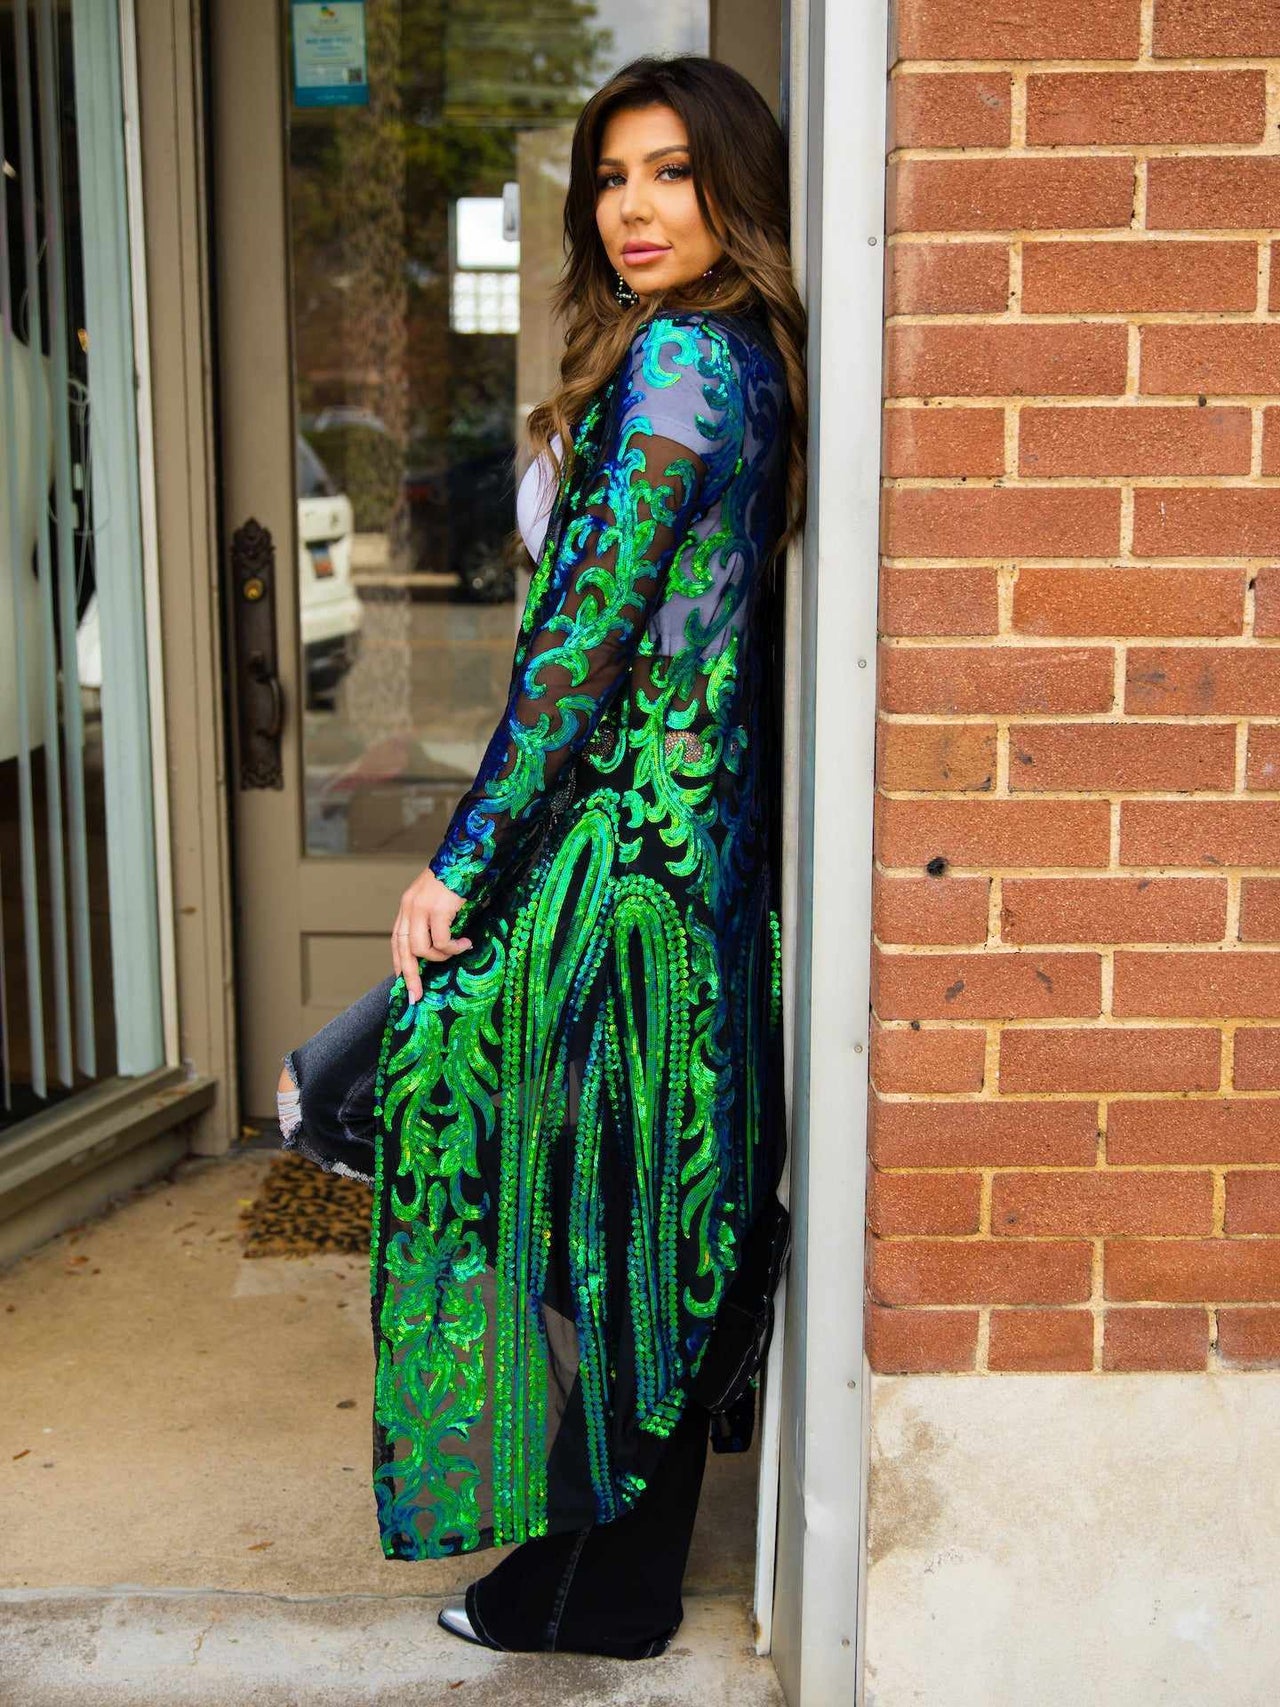 Royal Sequin Emerald Peacock Duster